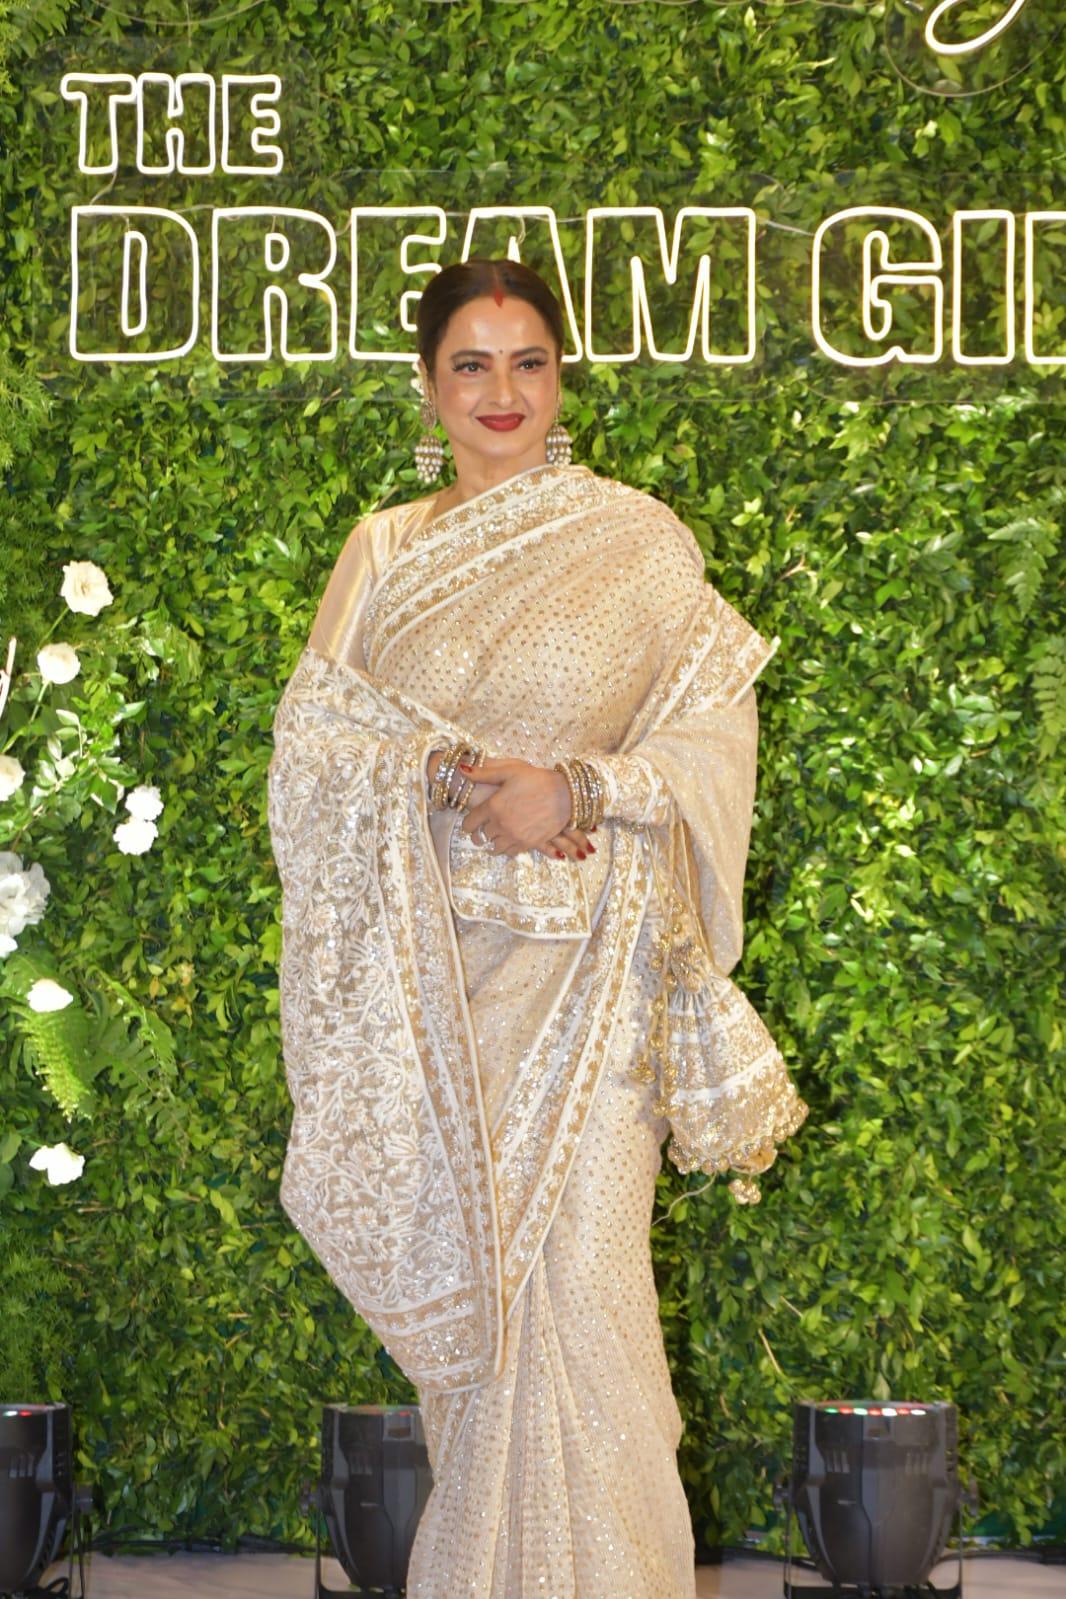 Rekha arrived at Dream Girl's birthday bash in all her glory. She looked ravishing in a cream saree